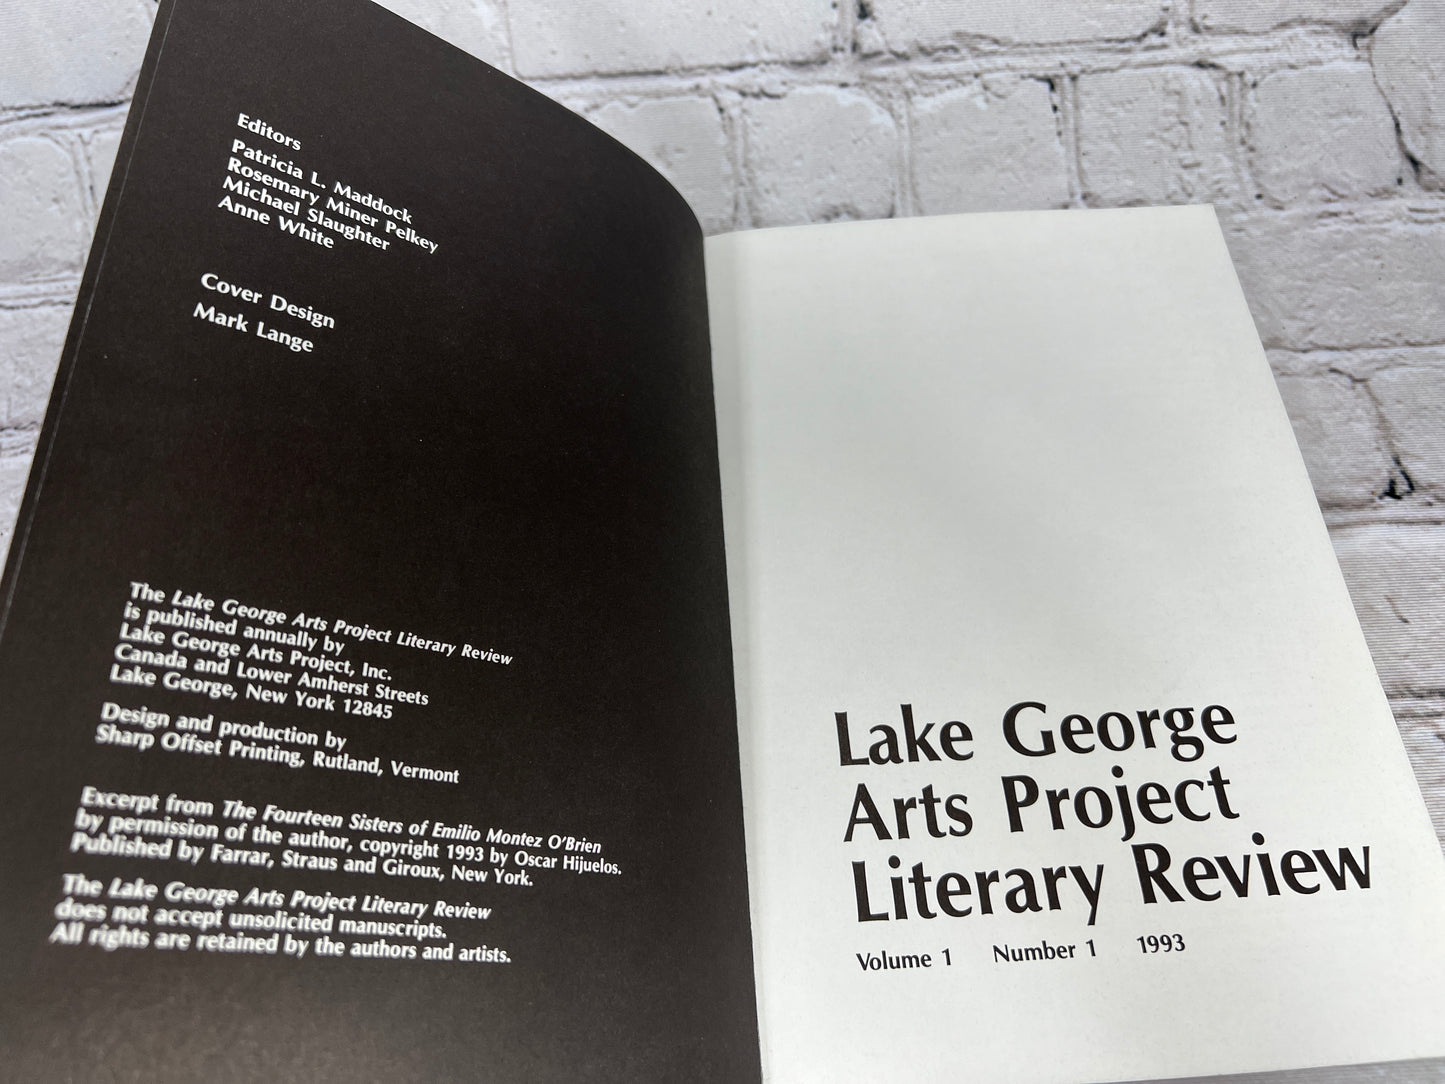 Lake George Arts Project Literary Review [Vol. 1 · Num. 1 · 1993]